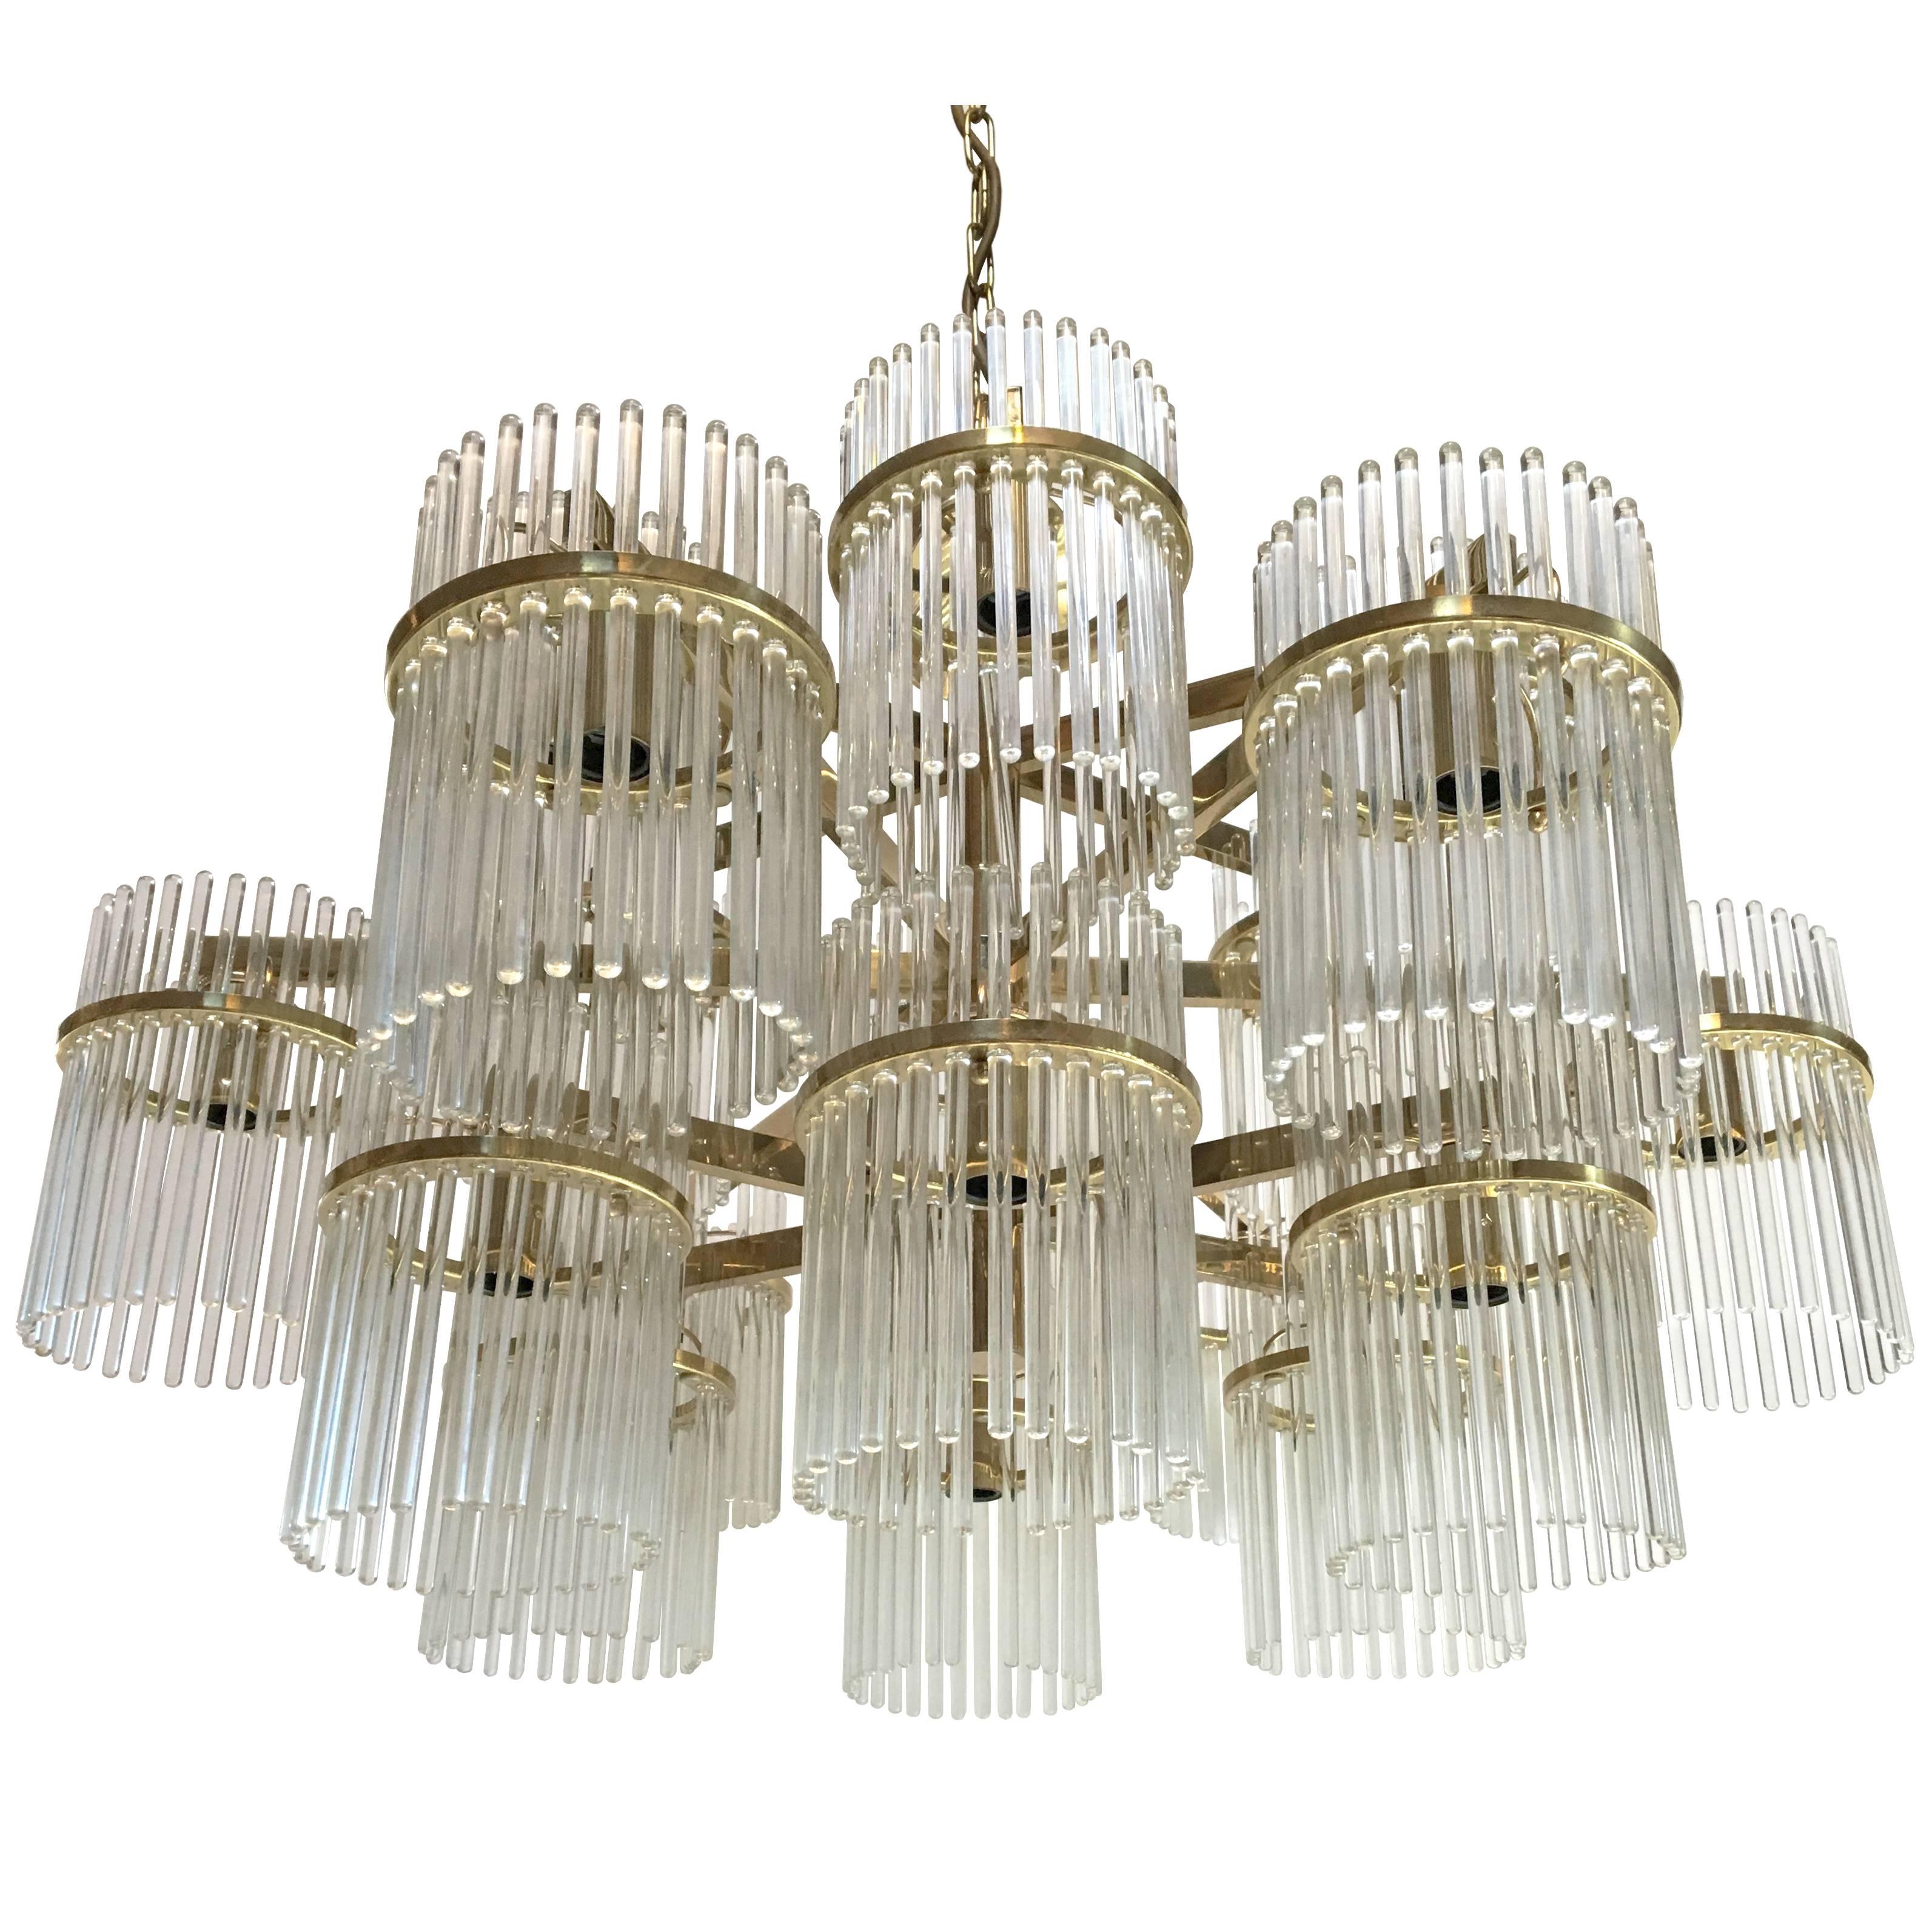 Large 18 Arm Brass and Glass Chandelier by Gaetano Sciolari For Sale